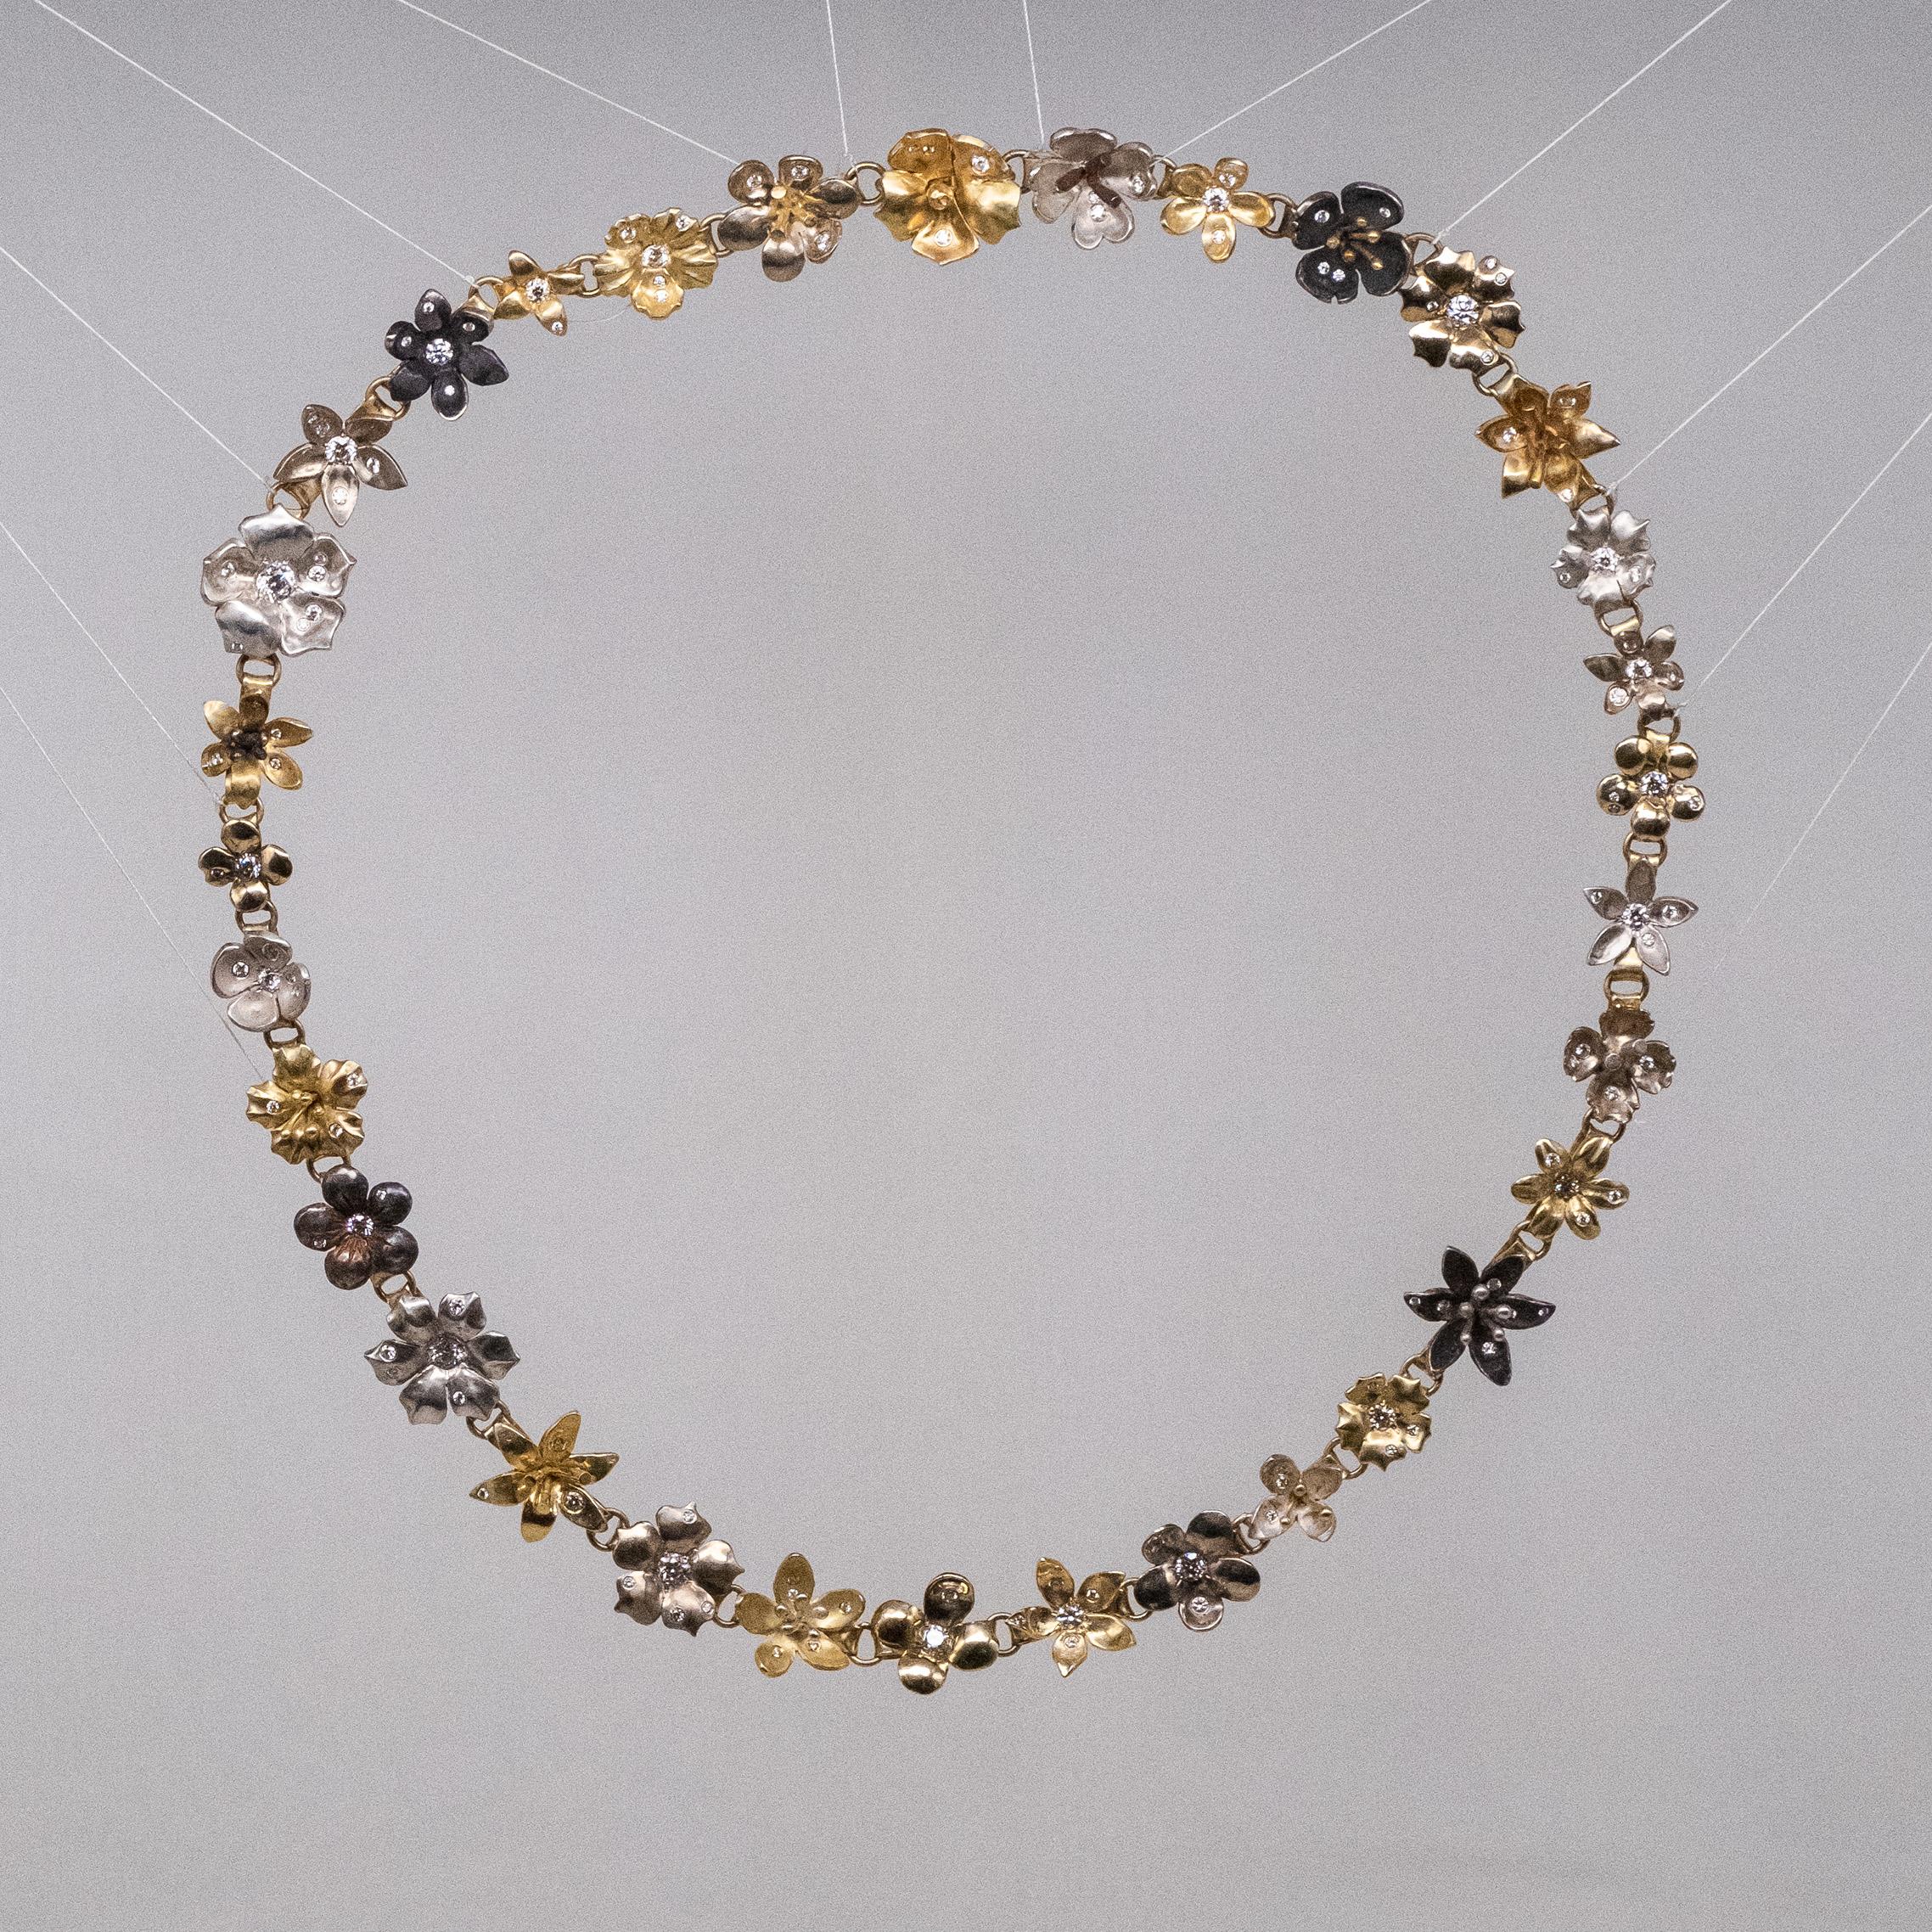 18K Fairmined Gold and Silver, Canadamark Diamonds, Handmade, Flower Necklace For Sale 1